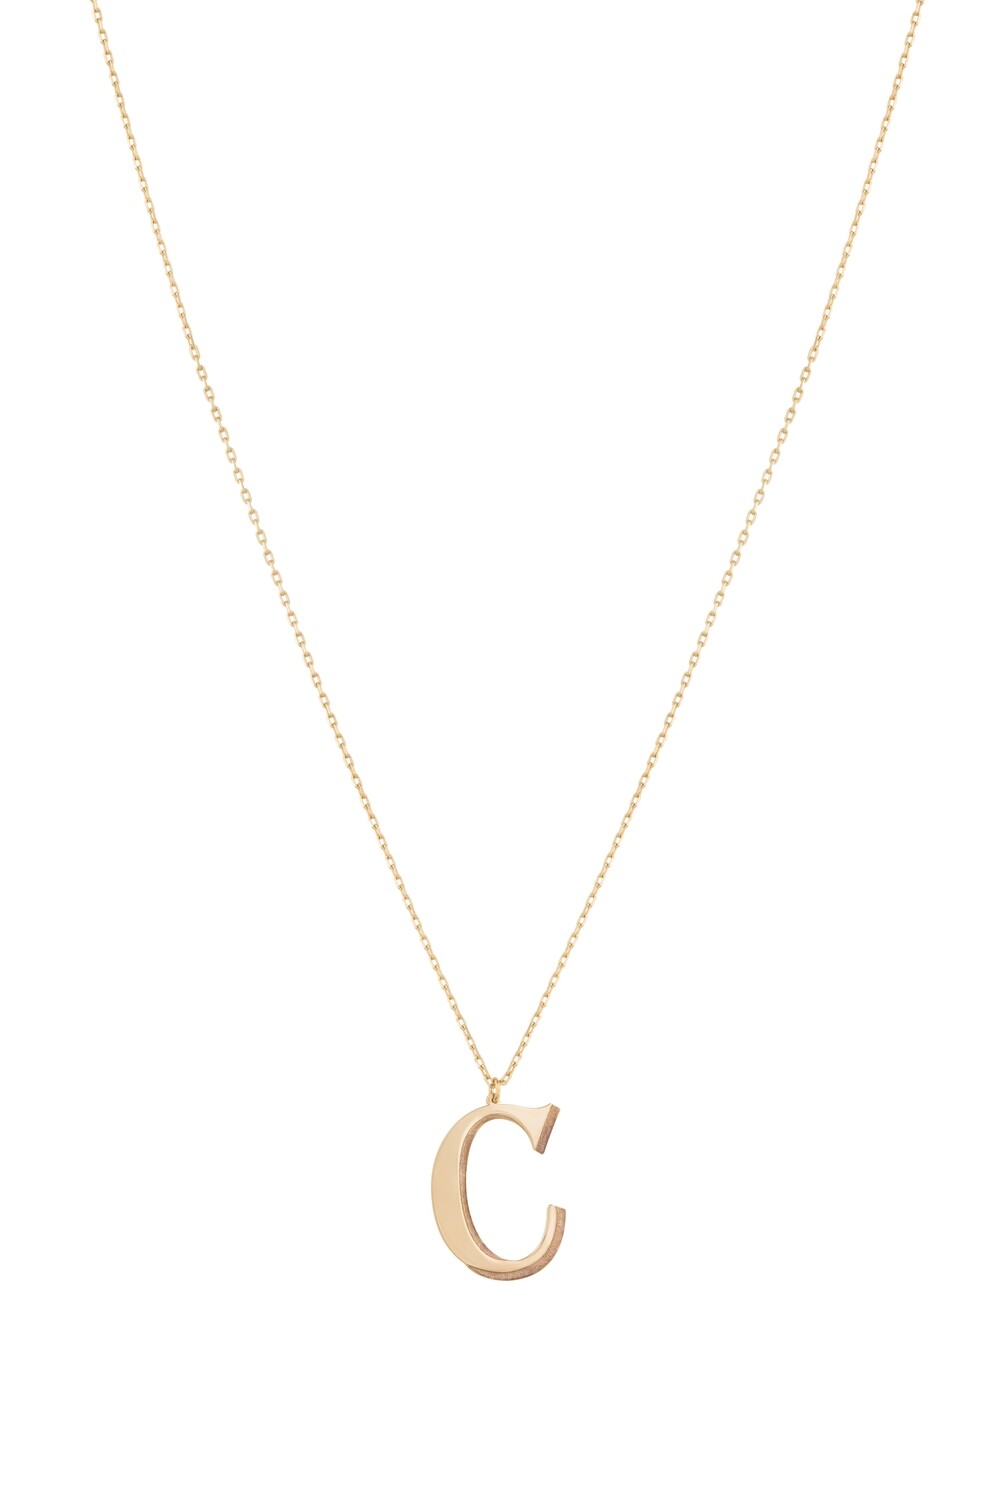 Initials Gold Necklace Letter C